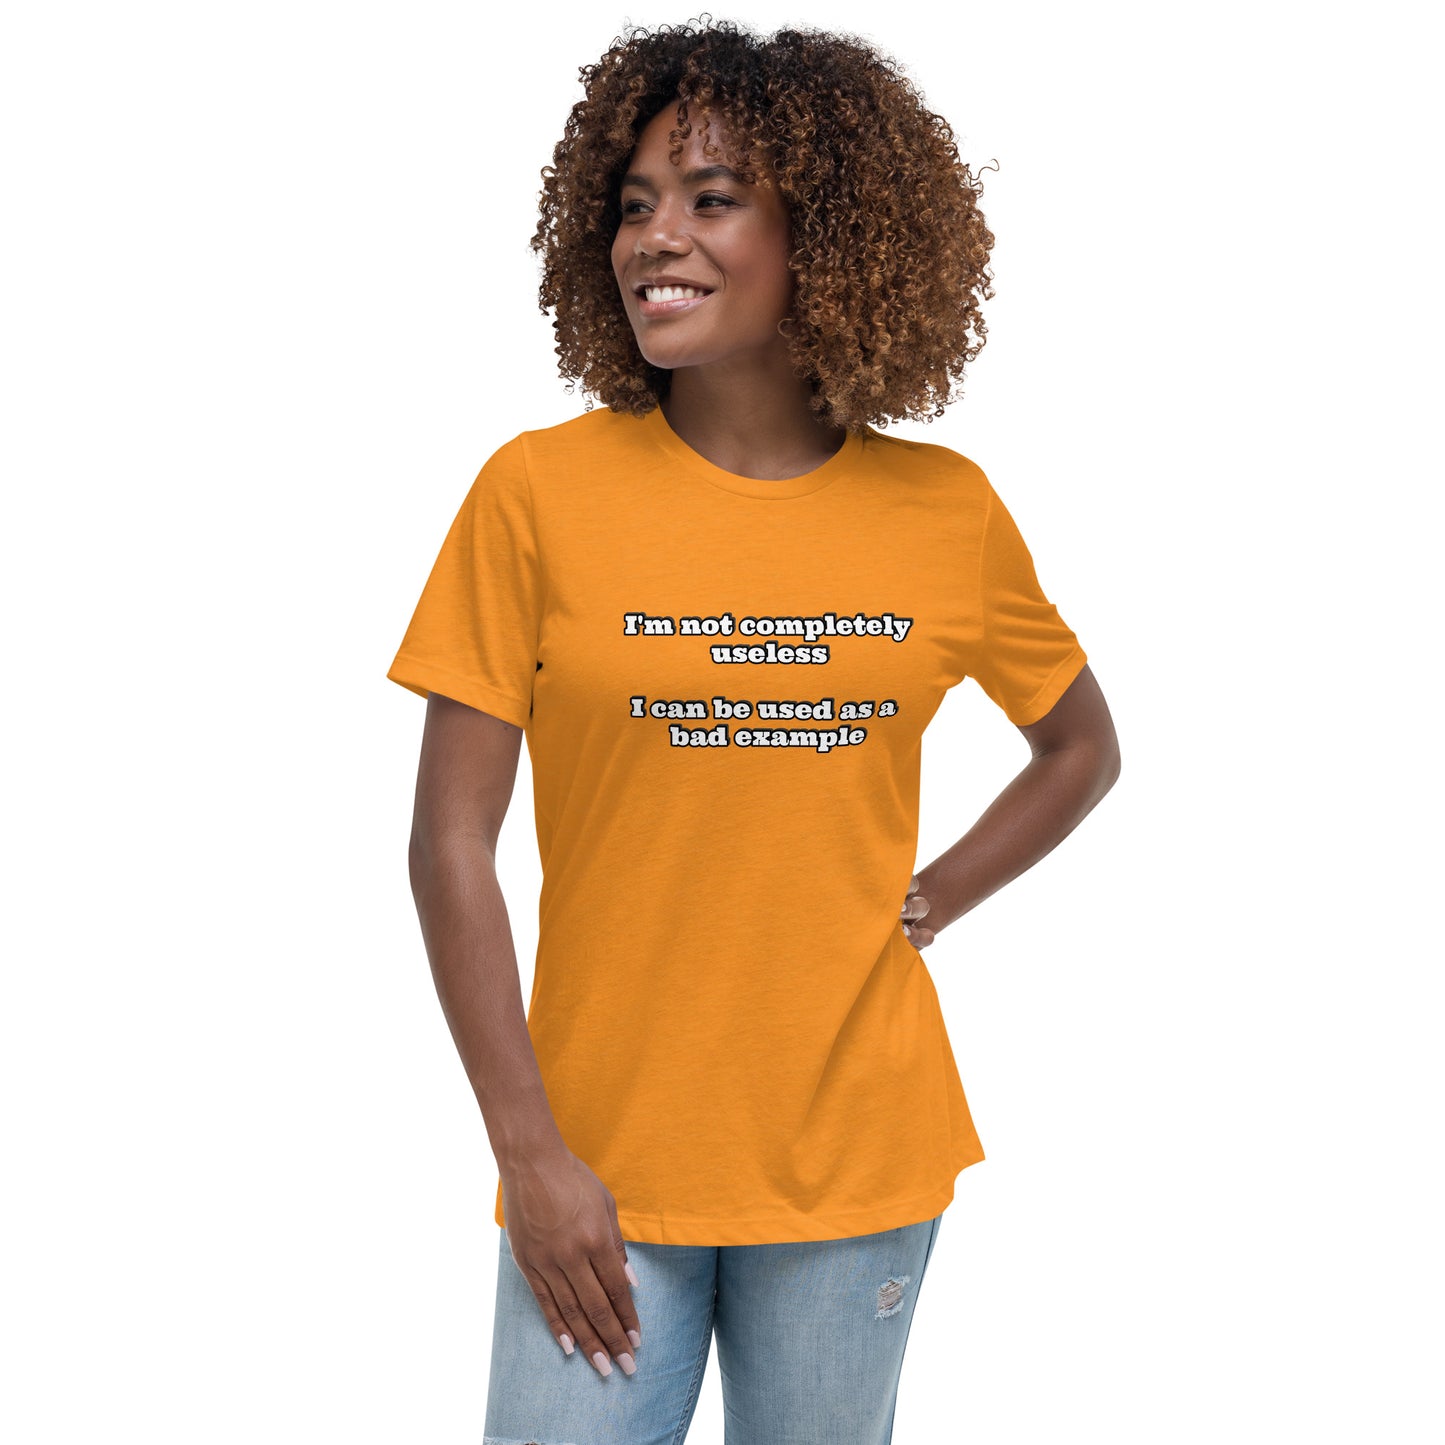 Women with marmalade t-shirt with text “I'm not completely useless I can be used as a bad example”